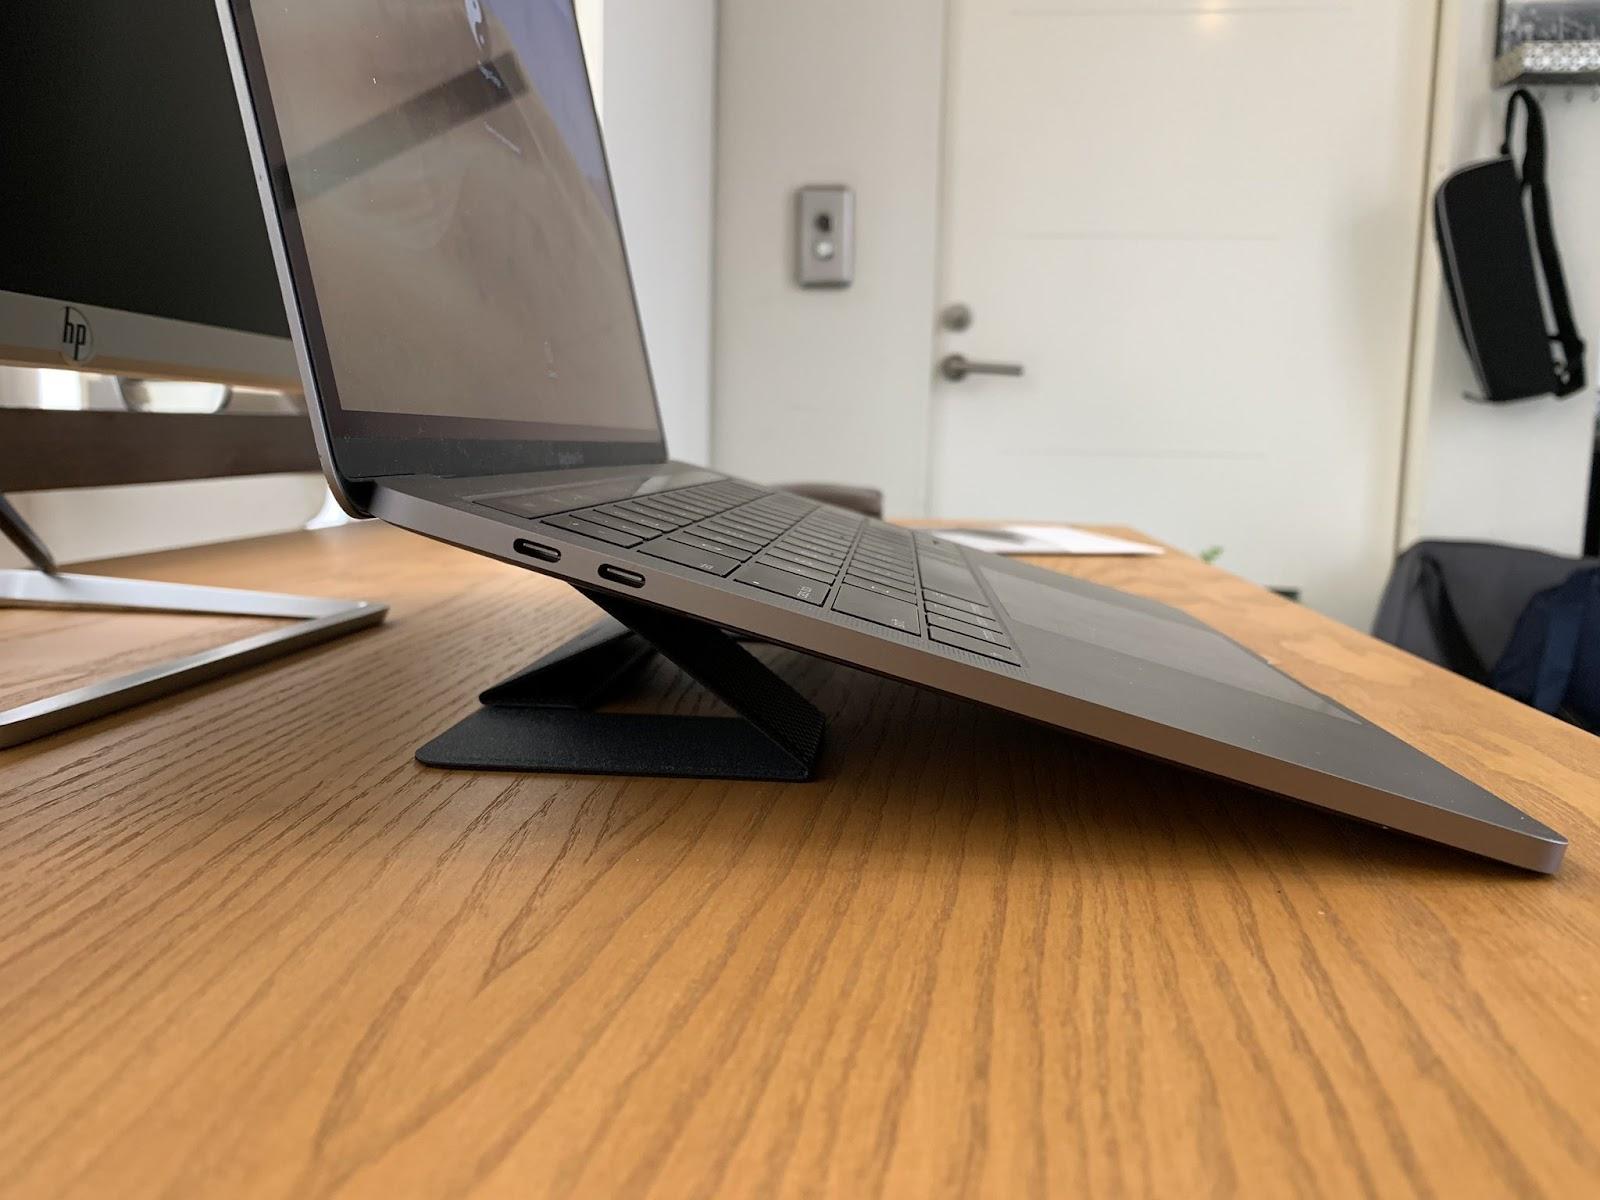 A laptop stand for lesser body aches.